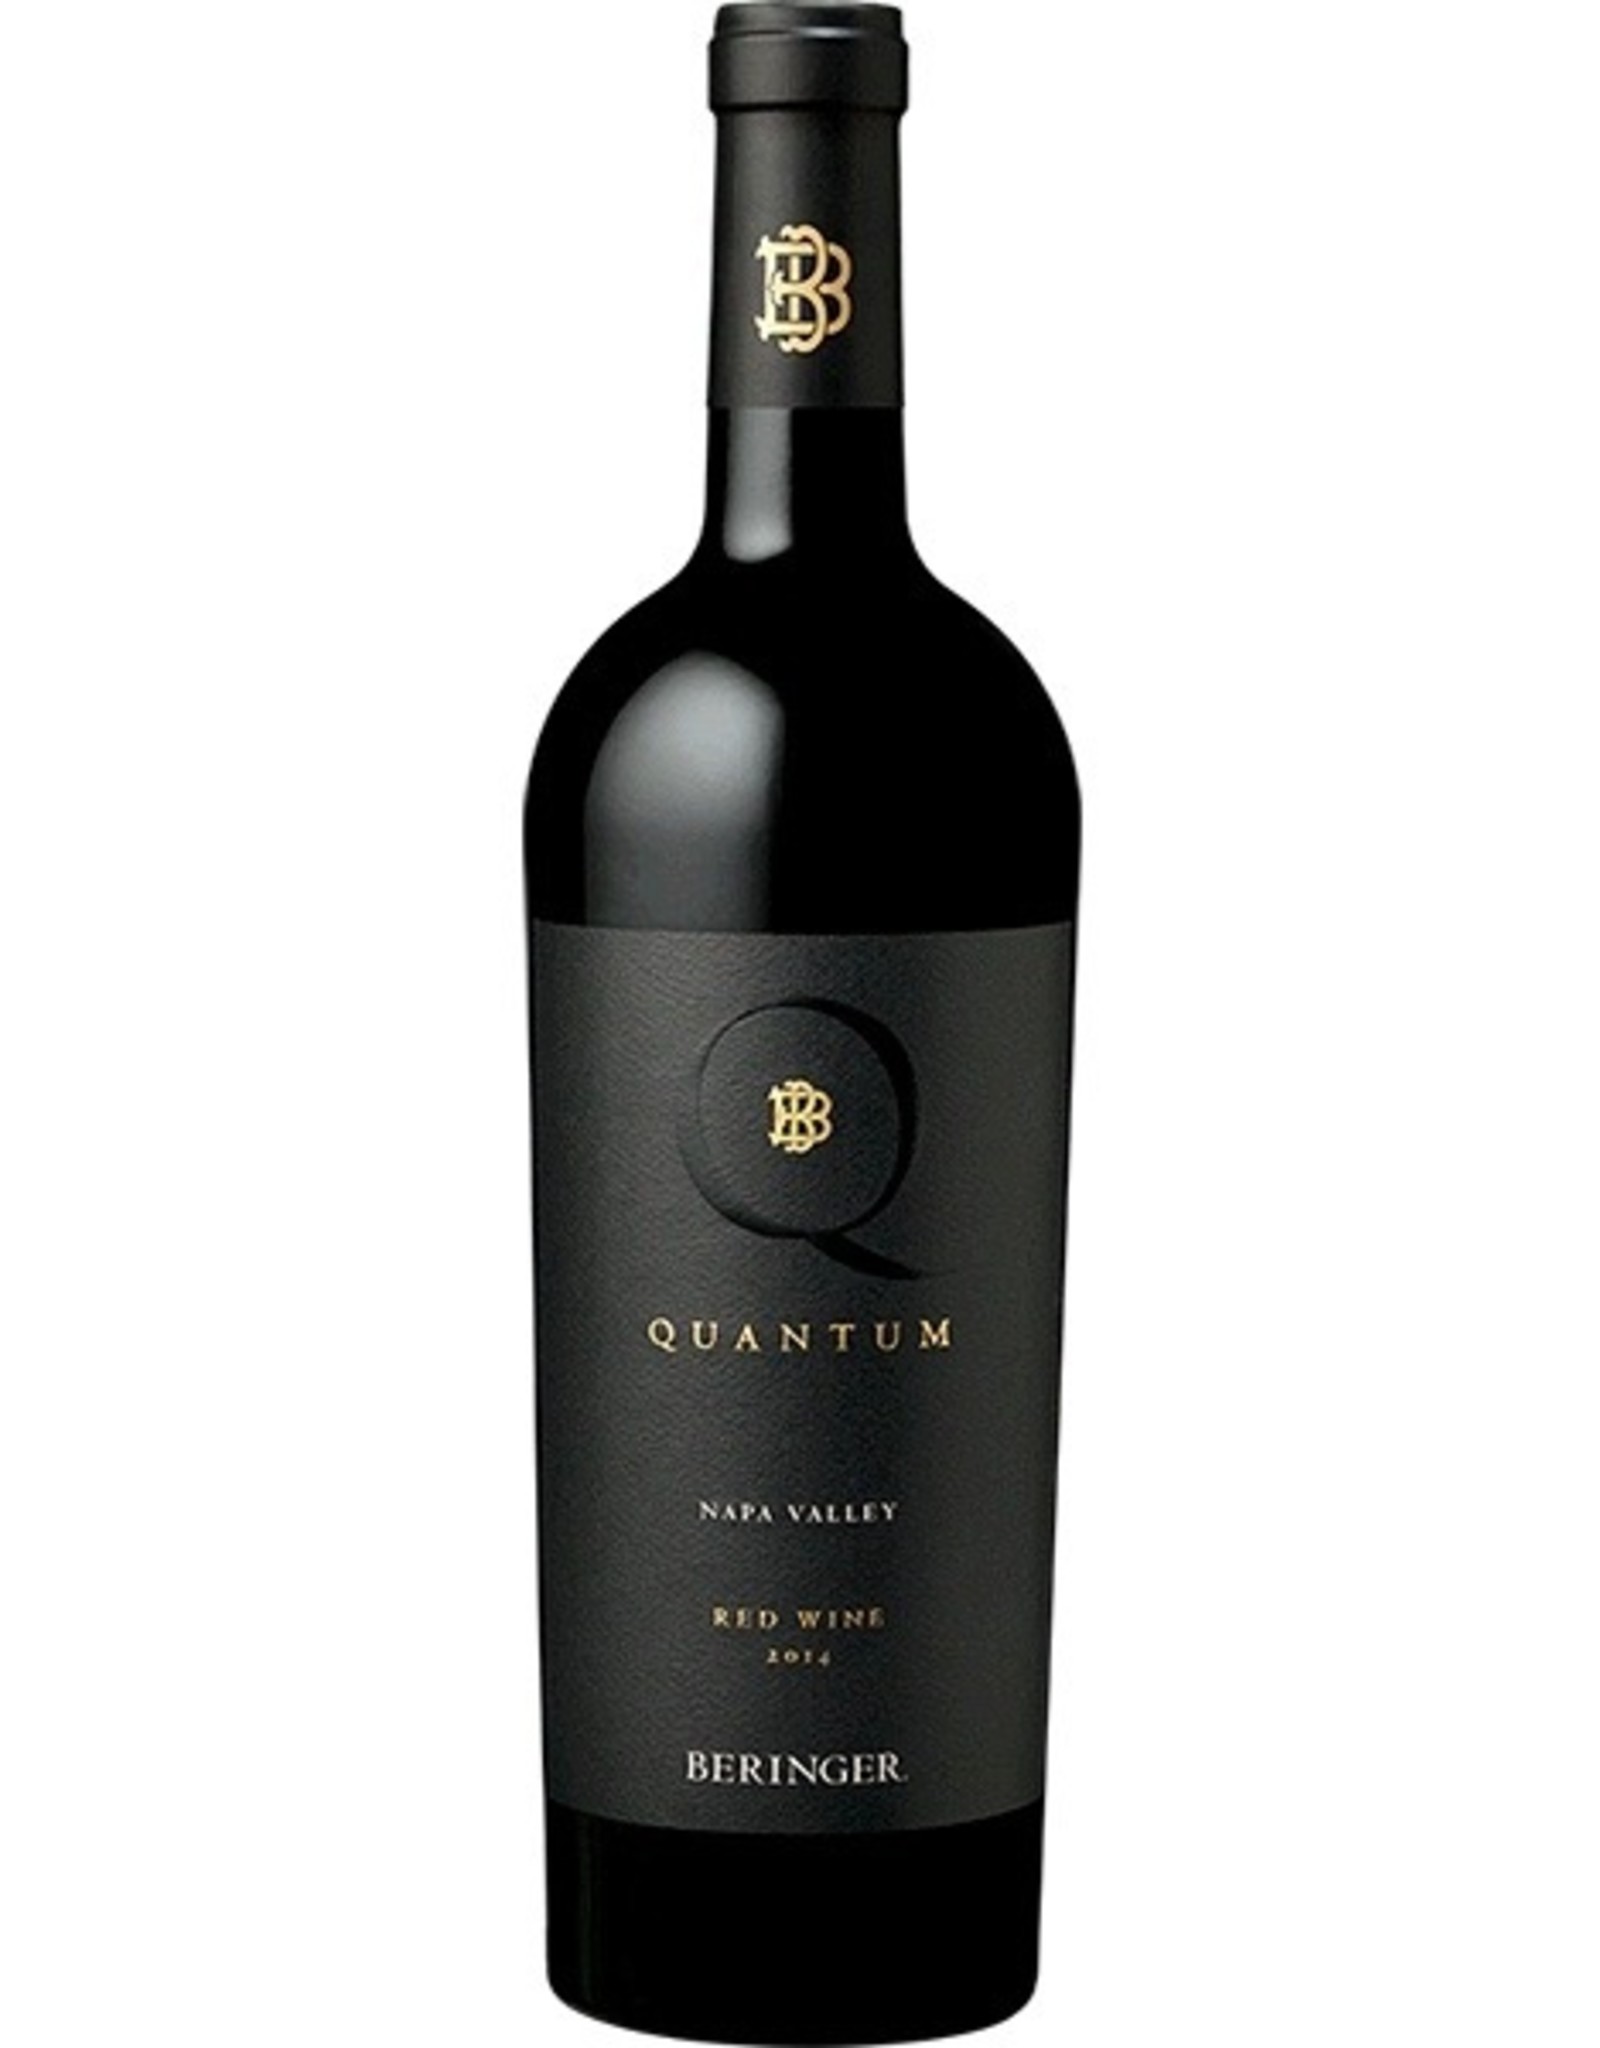 Red Wine 2014, QUANTUM by Beringer, Red Wine Blend, Napa Valley, Napa, California, 15.0% Alc, WE91